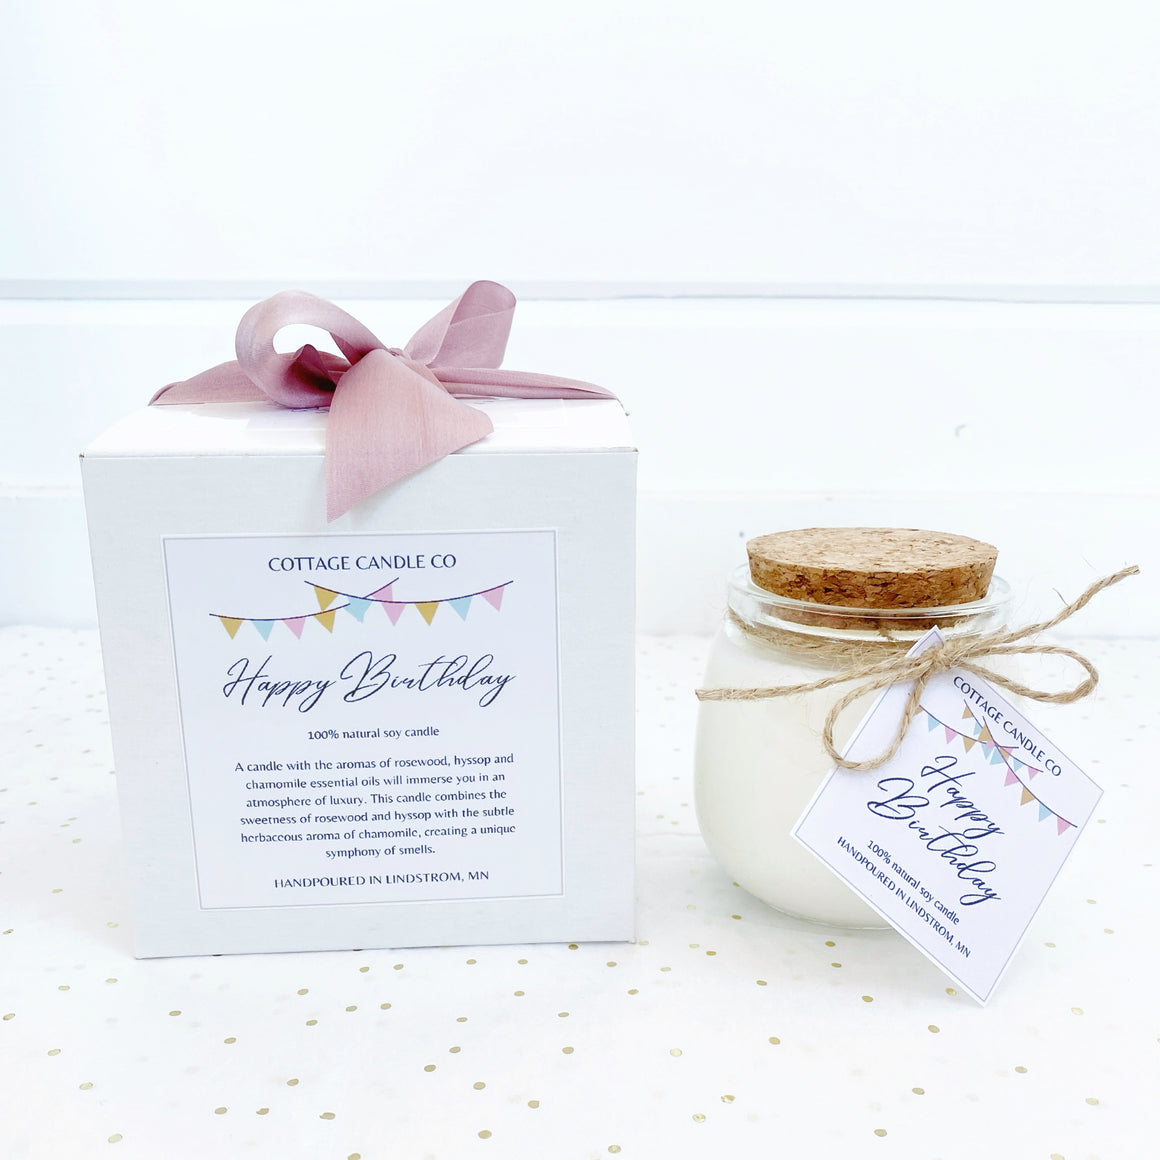 HAPPY BIRTHDAY CANDLE - THE PERFECT GIFT!